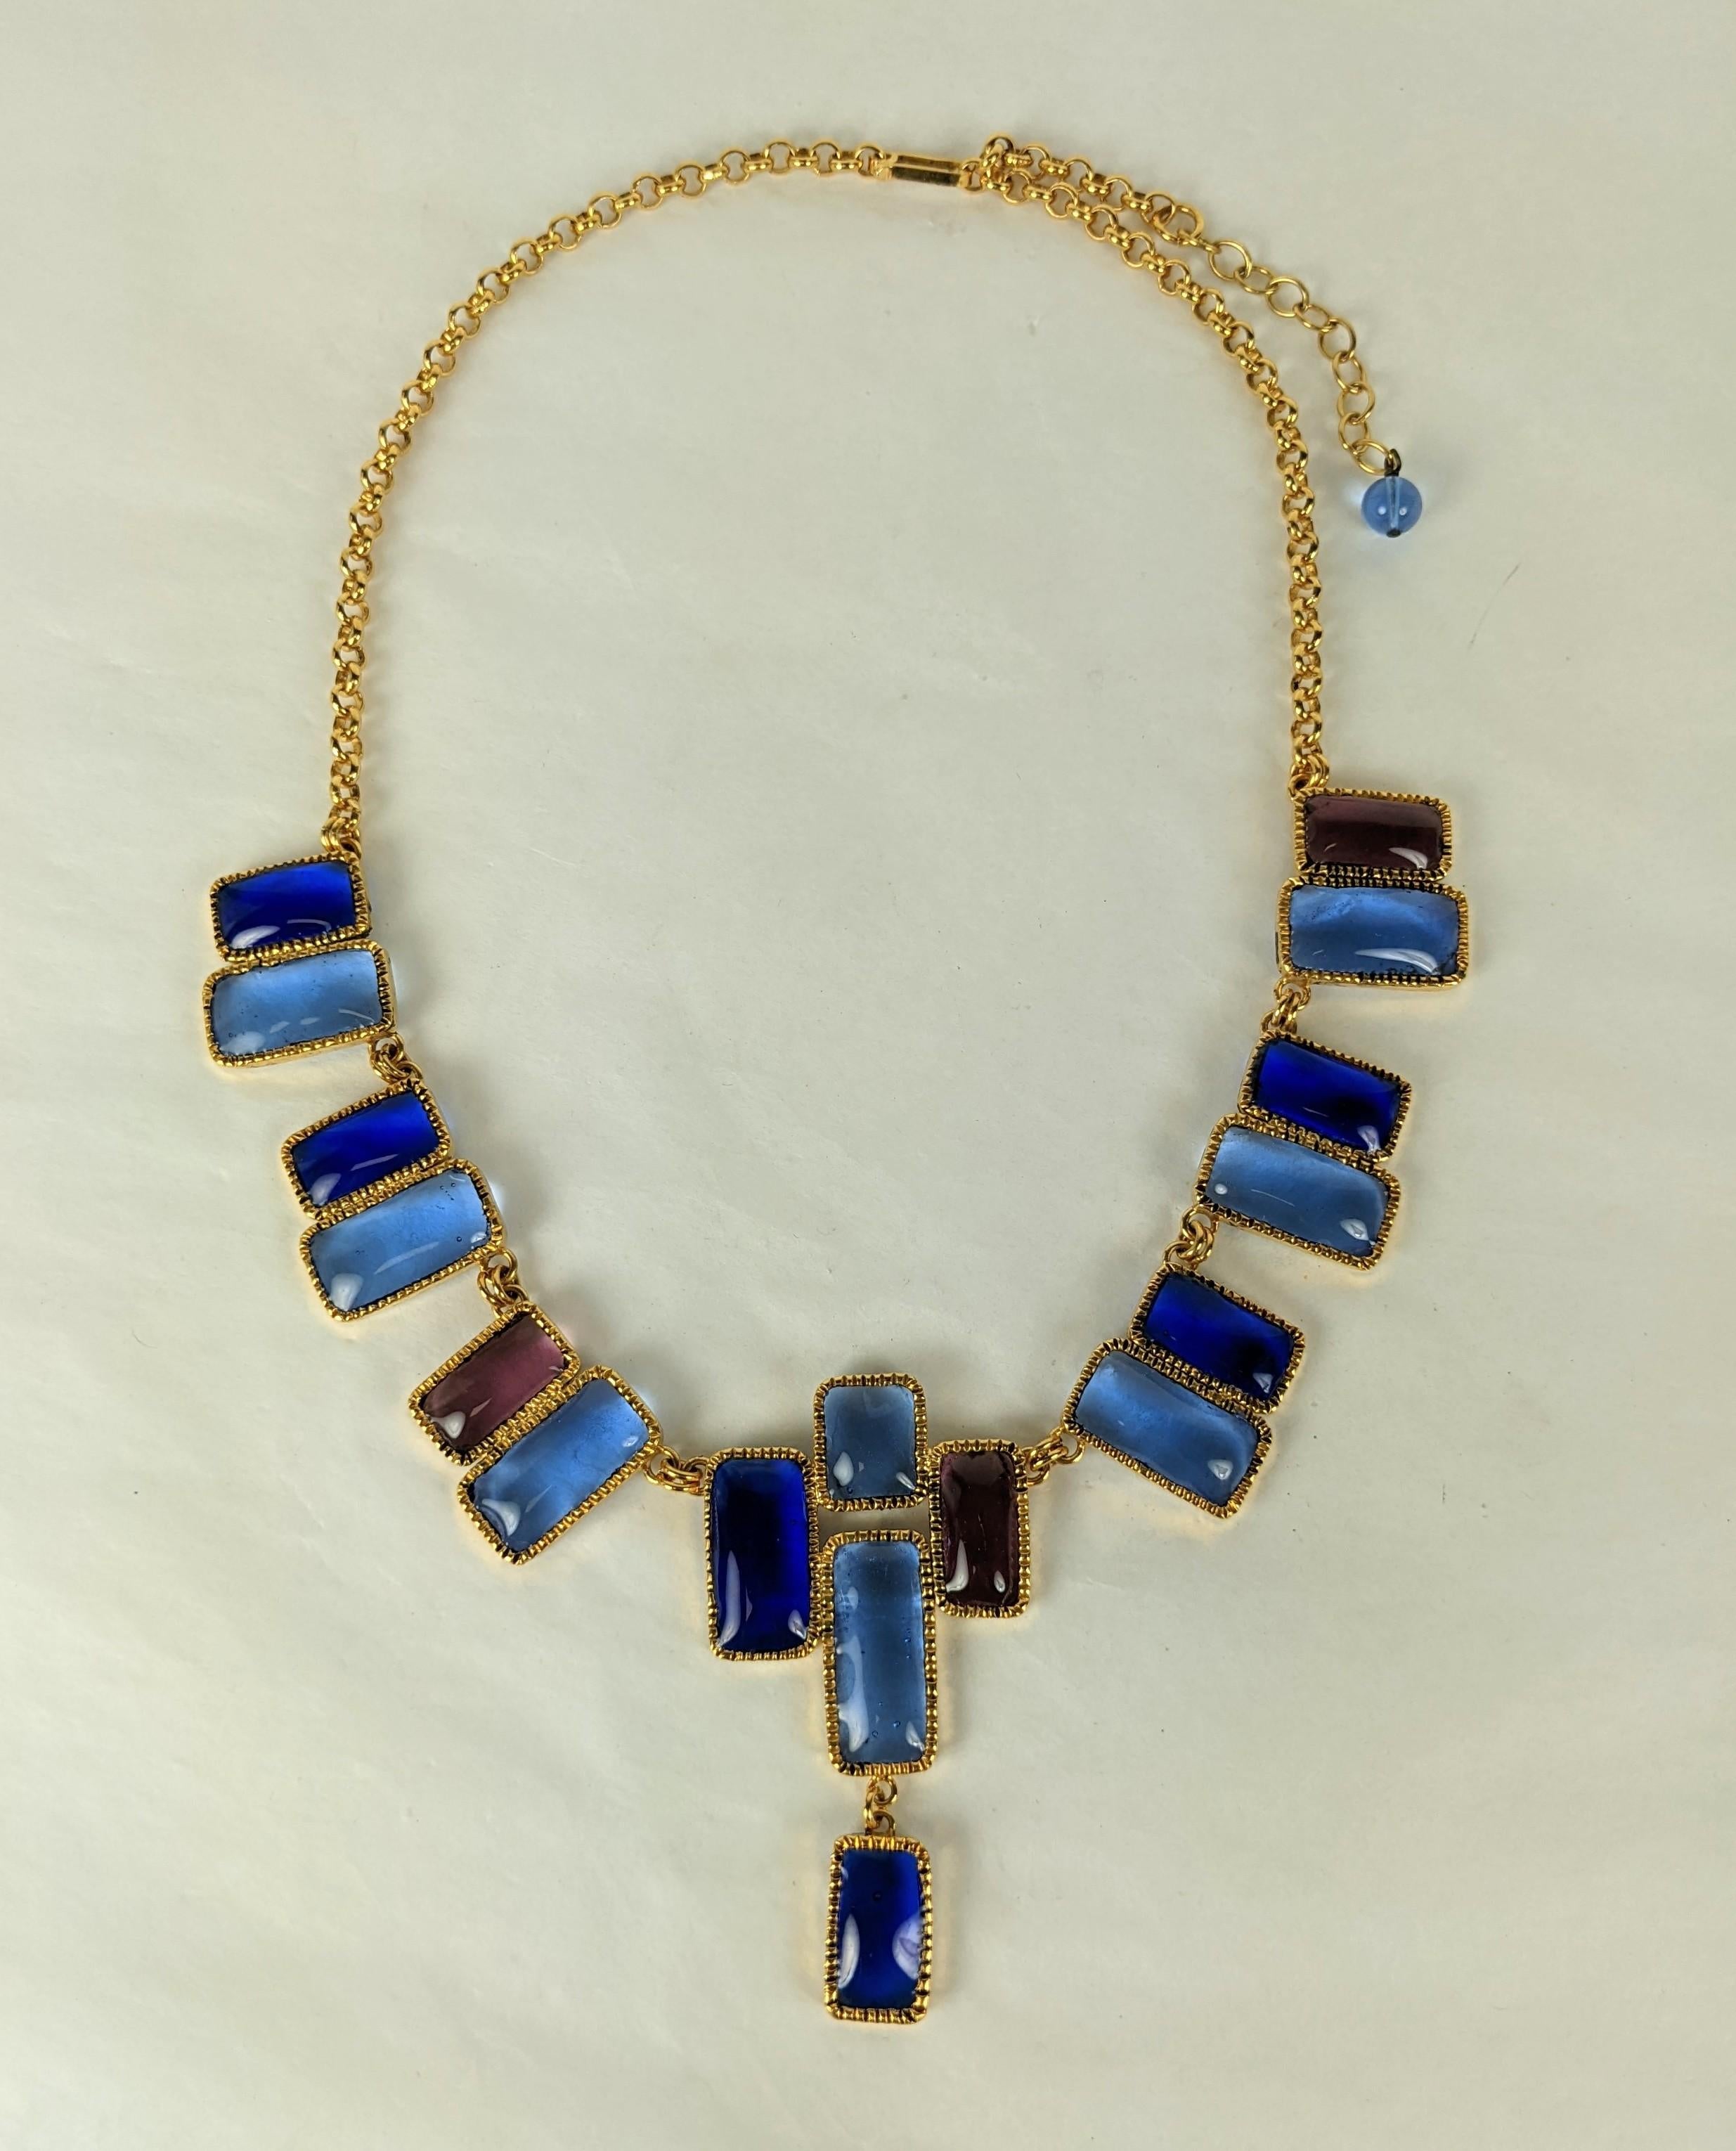 Maison Gripoix for Yves Saint Laurent Mondrian necklace. Of Gripoix Glass hand poured enamel in shades of sapphire and amythest set in gold plated hammered bronze. 
The vari sized asymmetrically placed rectangles linked on gilt chain. Unsigned HC, 